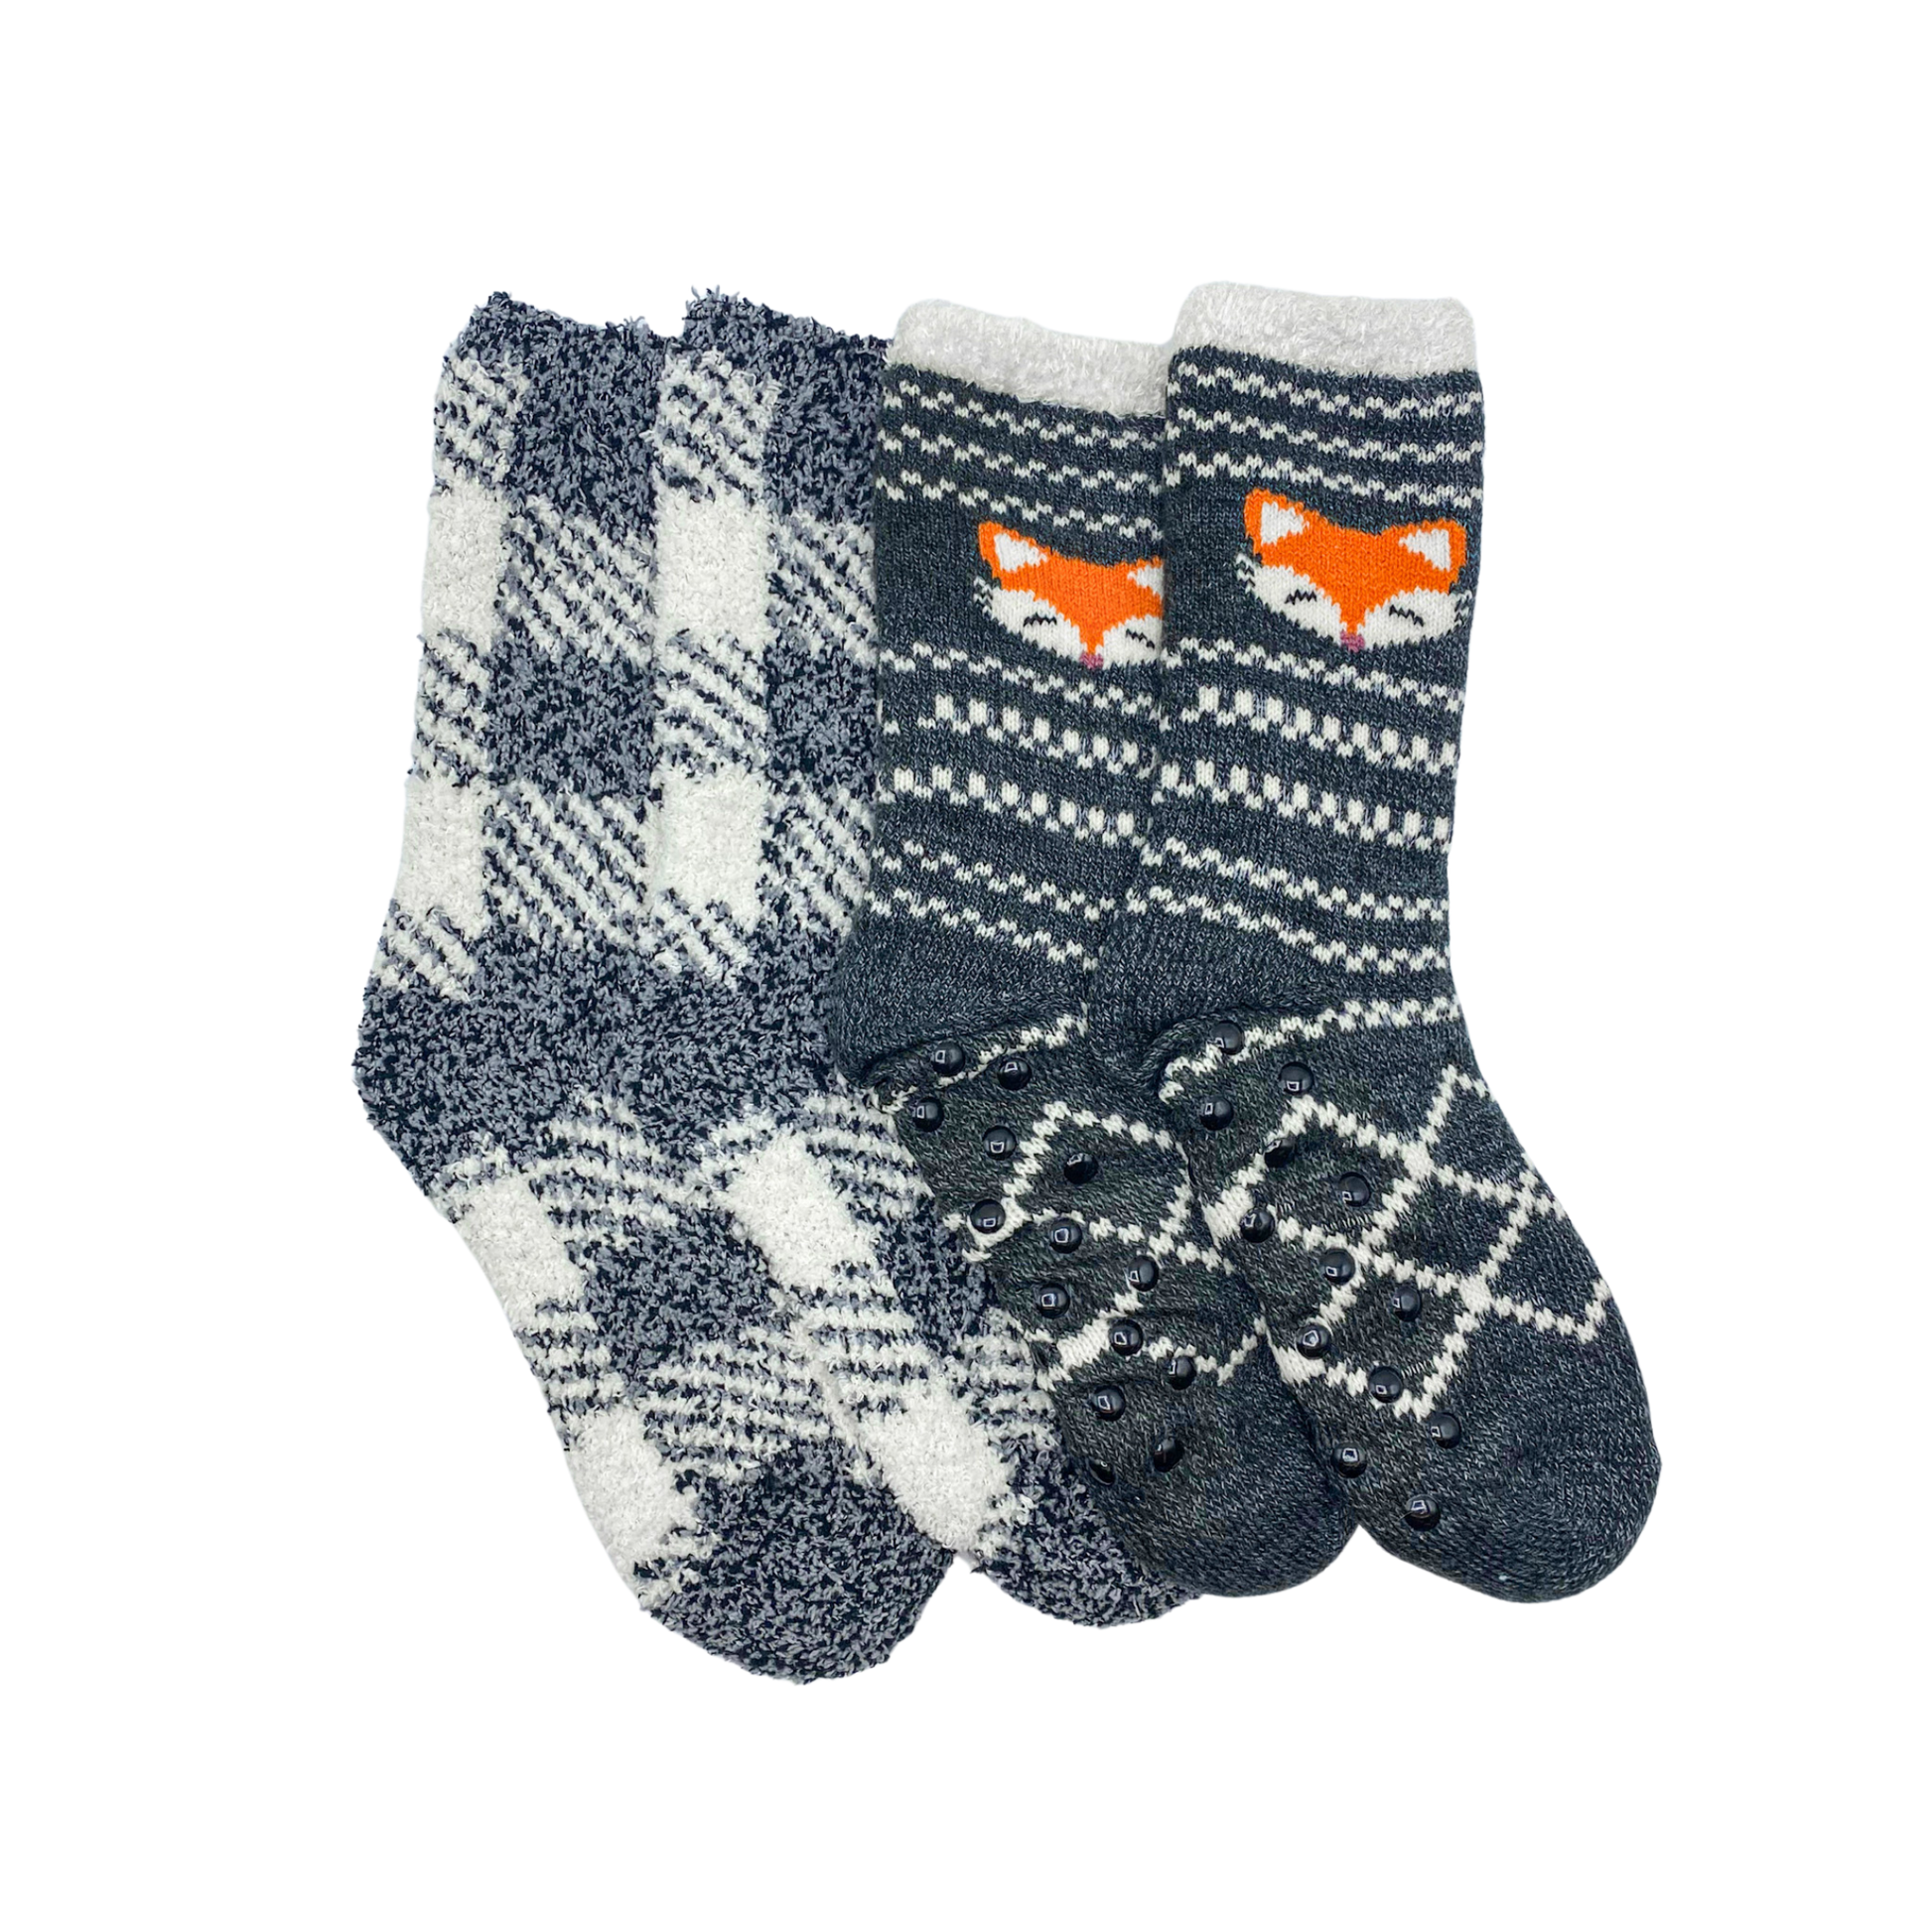 Two pairs of socks sitting next to each other. The socks are made of a soft, cozy material and are in the colors grey, white, and orange. 

The left pair of socks are white and grey plaid, while the right pair have white zig zag lines with a fox face on the side.